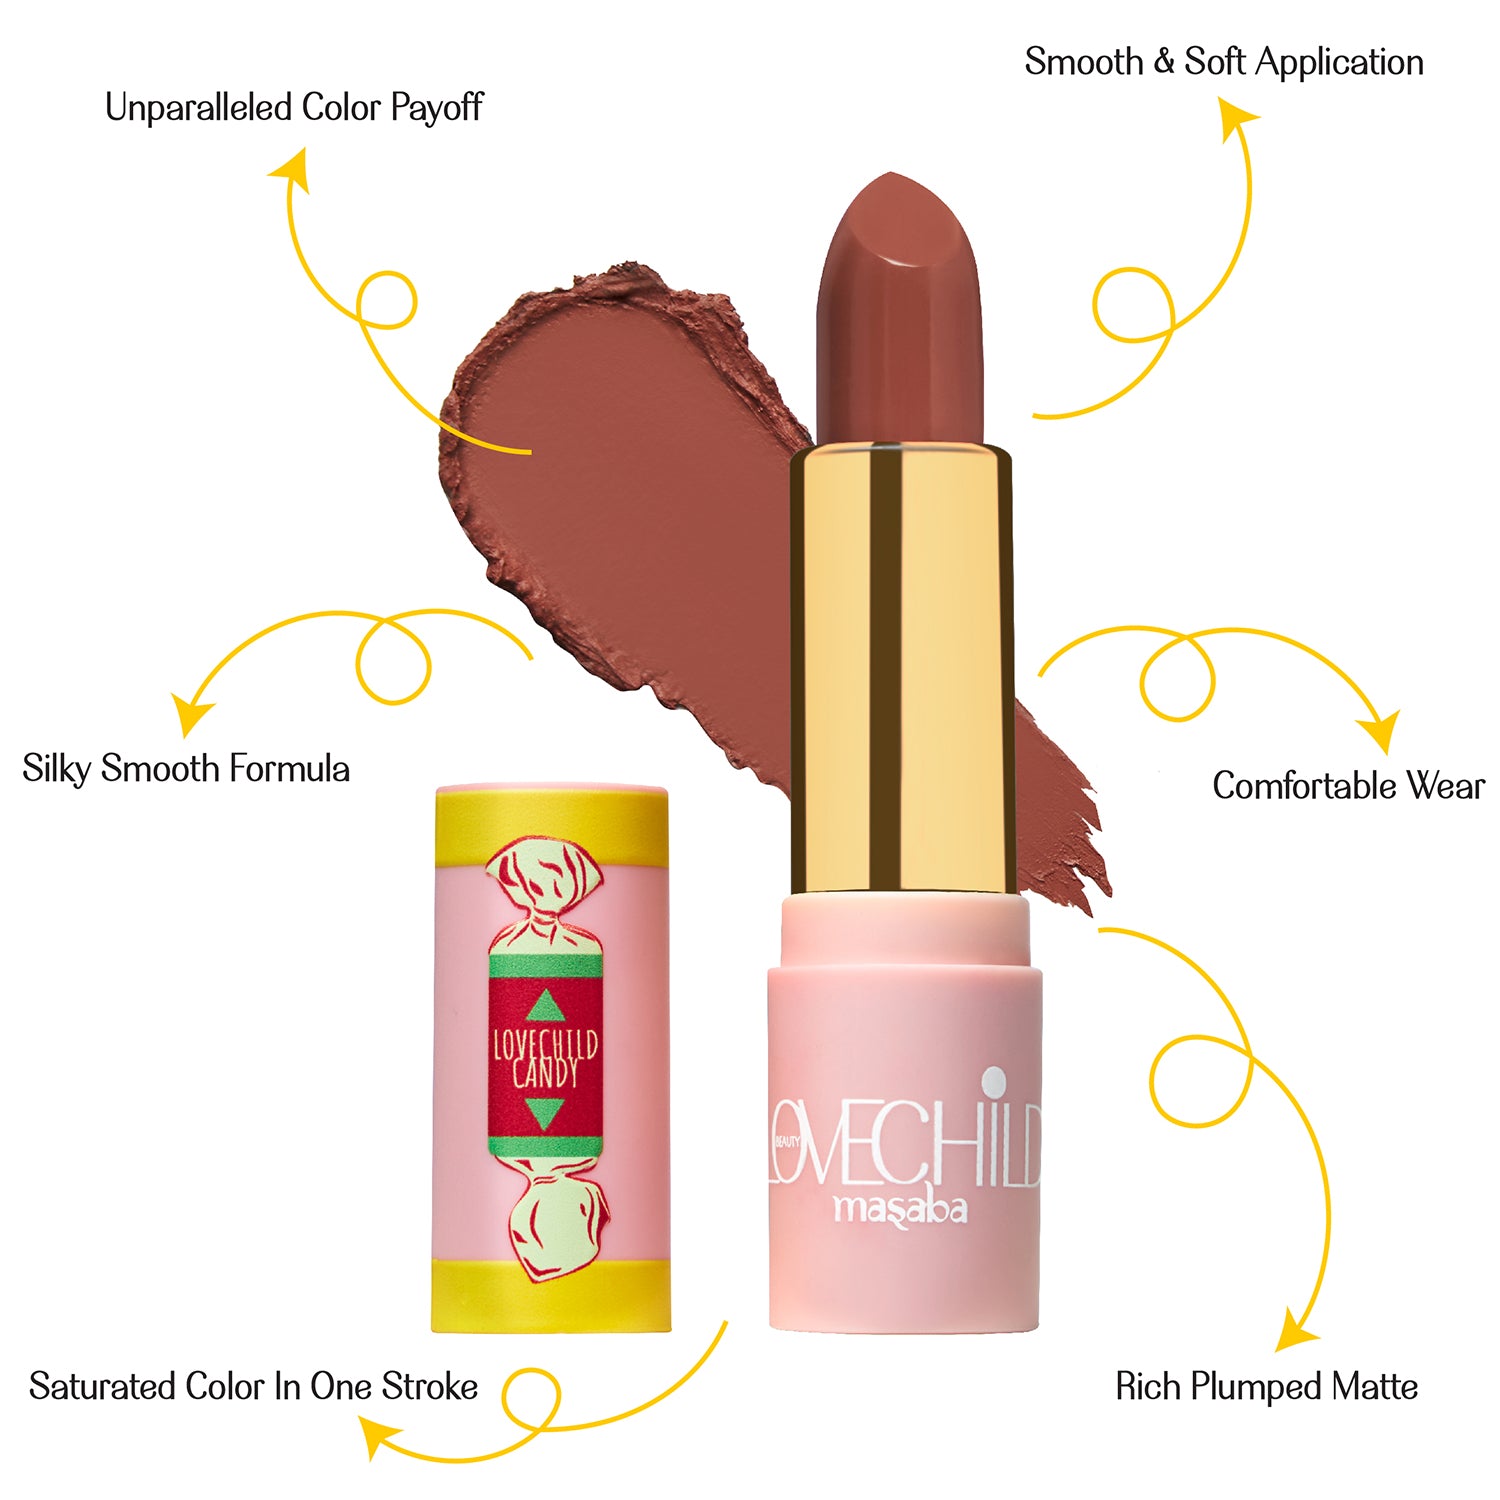 LoveChild Masaba - For the Kid in You! - 03 Sweet Supreme - Luxe Matte Lipstick